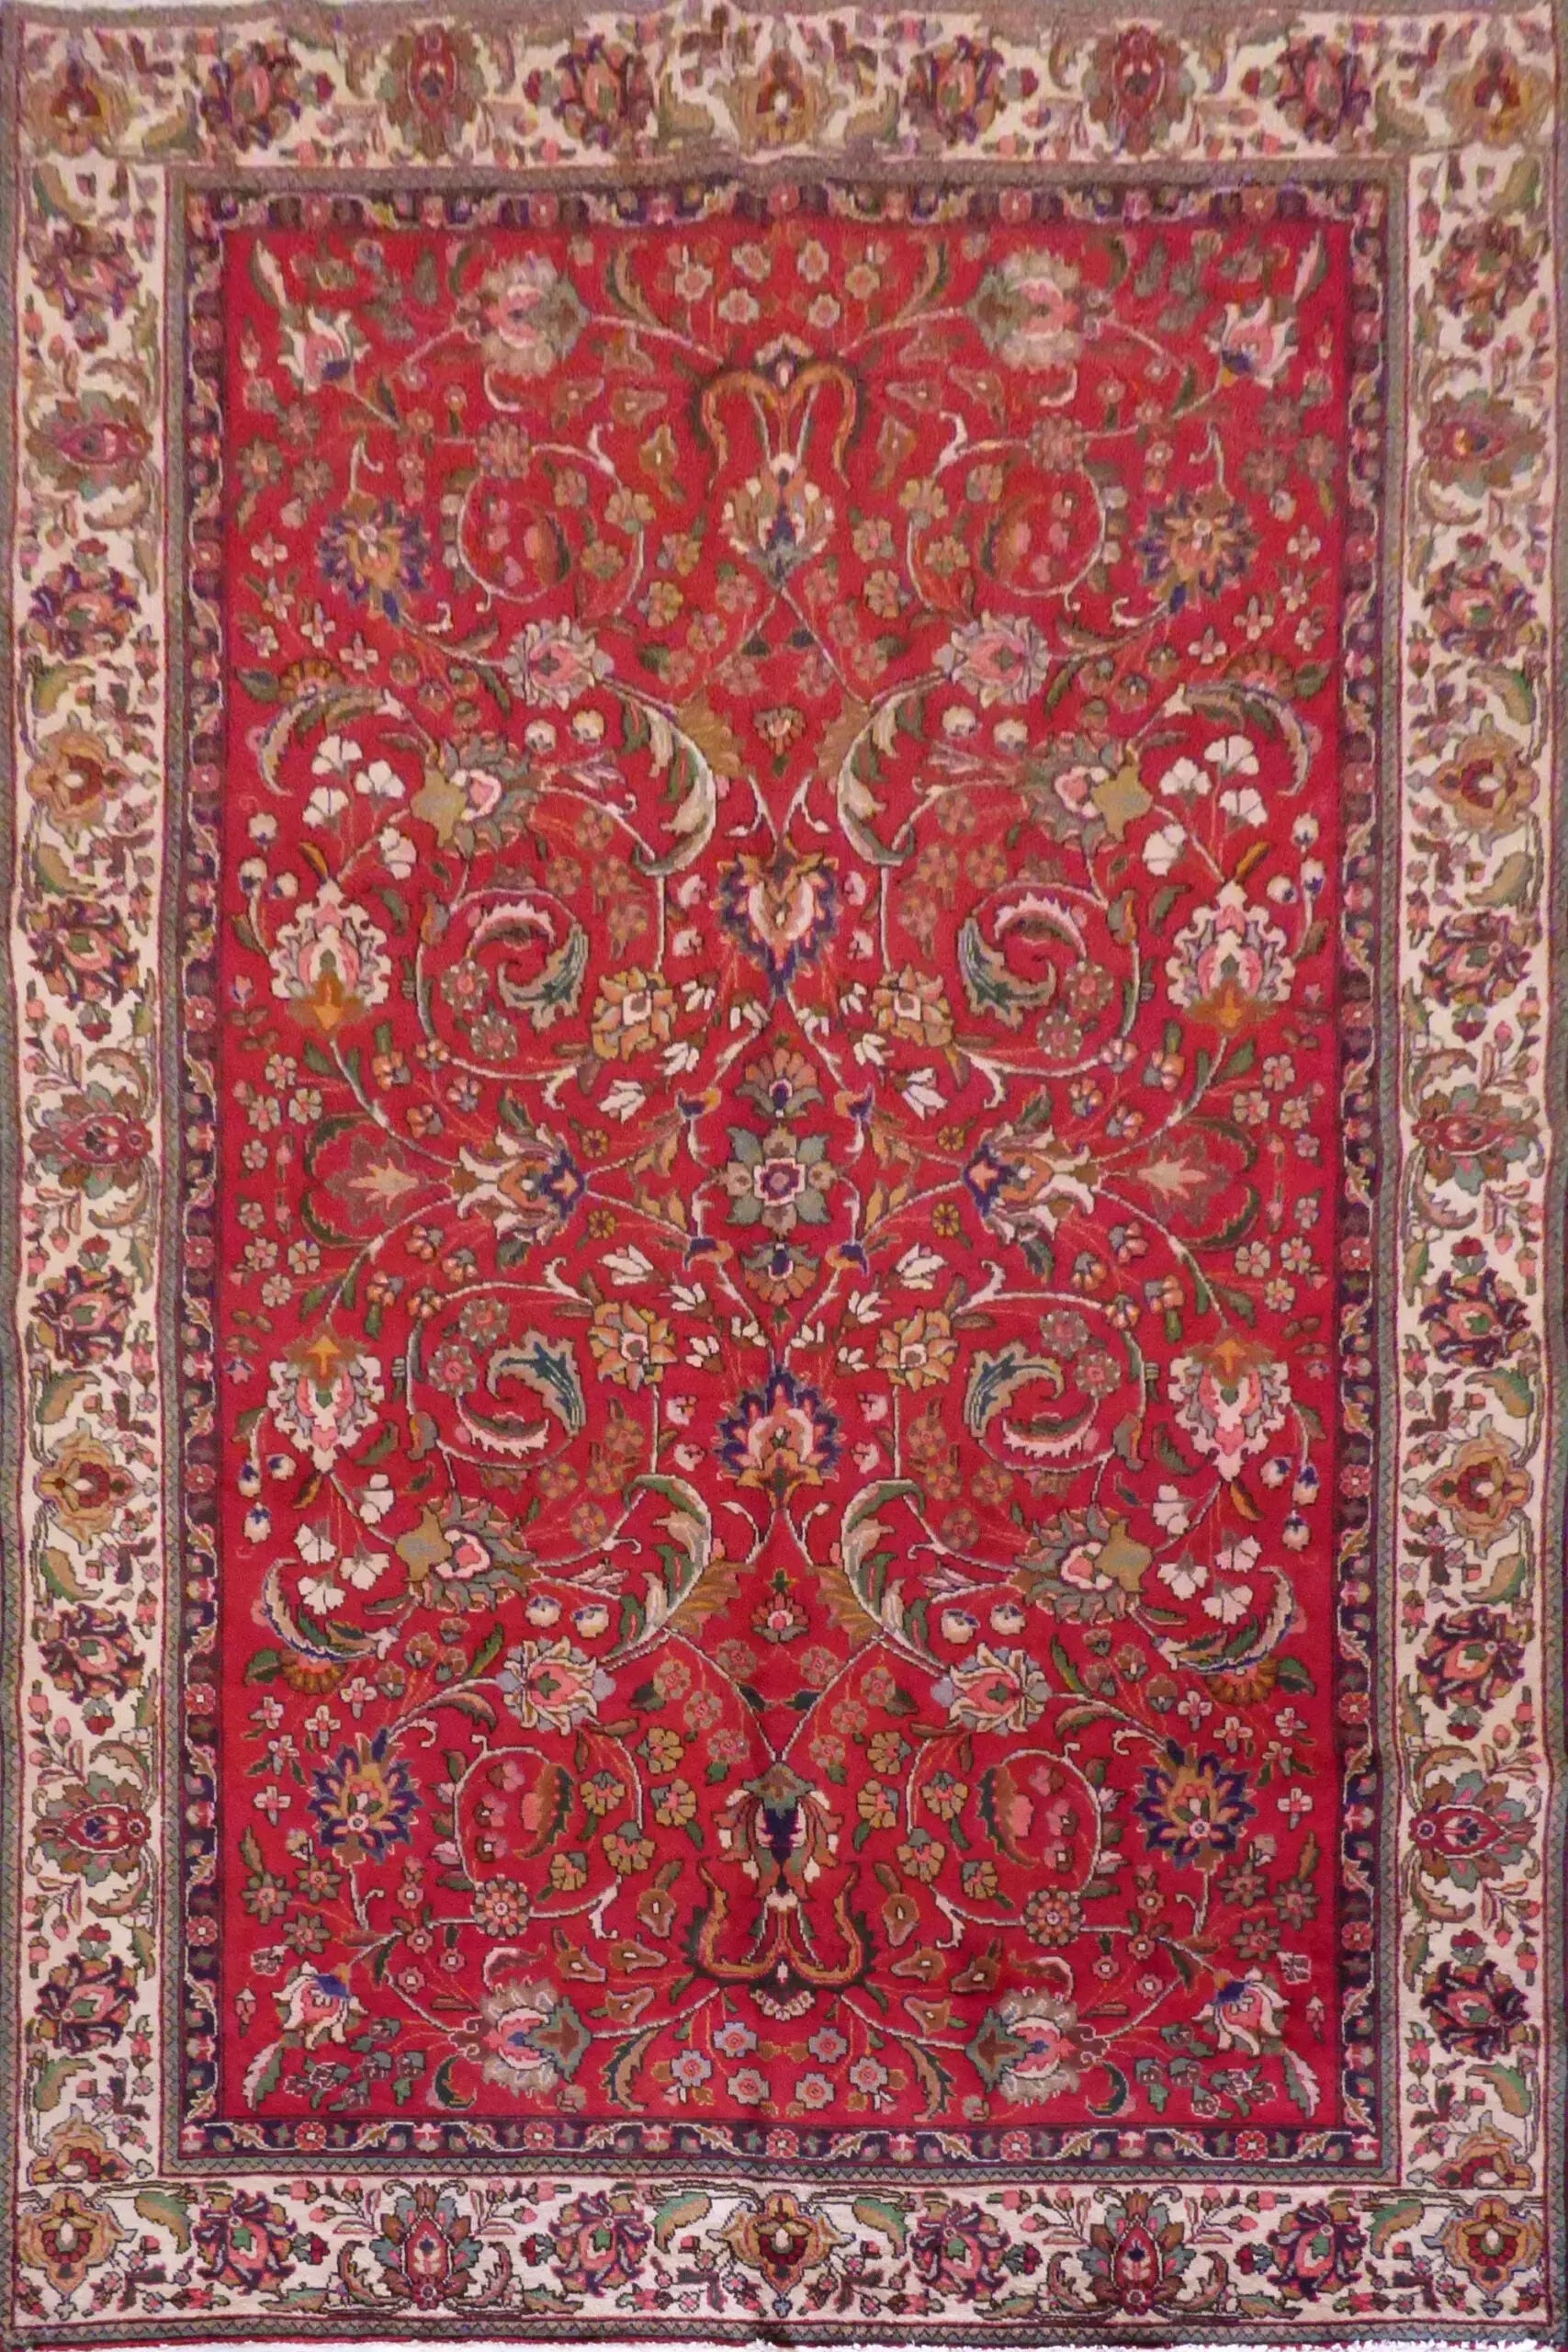 Tarbiz Semi Antique Hand Knotted Persian Tabriz Rugs Multi Color, 7'5" X 10'5", Panr01251 (Red : 10561)